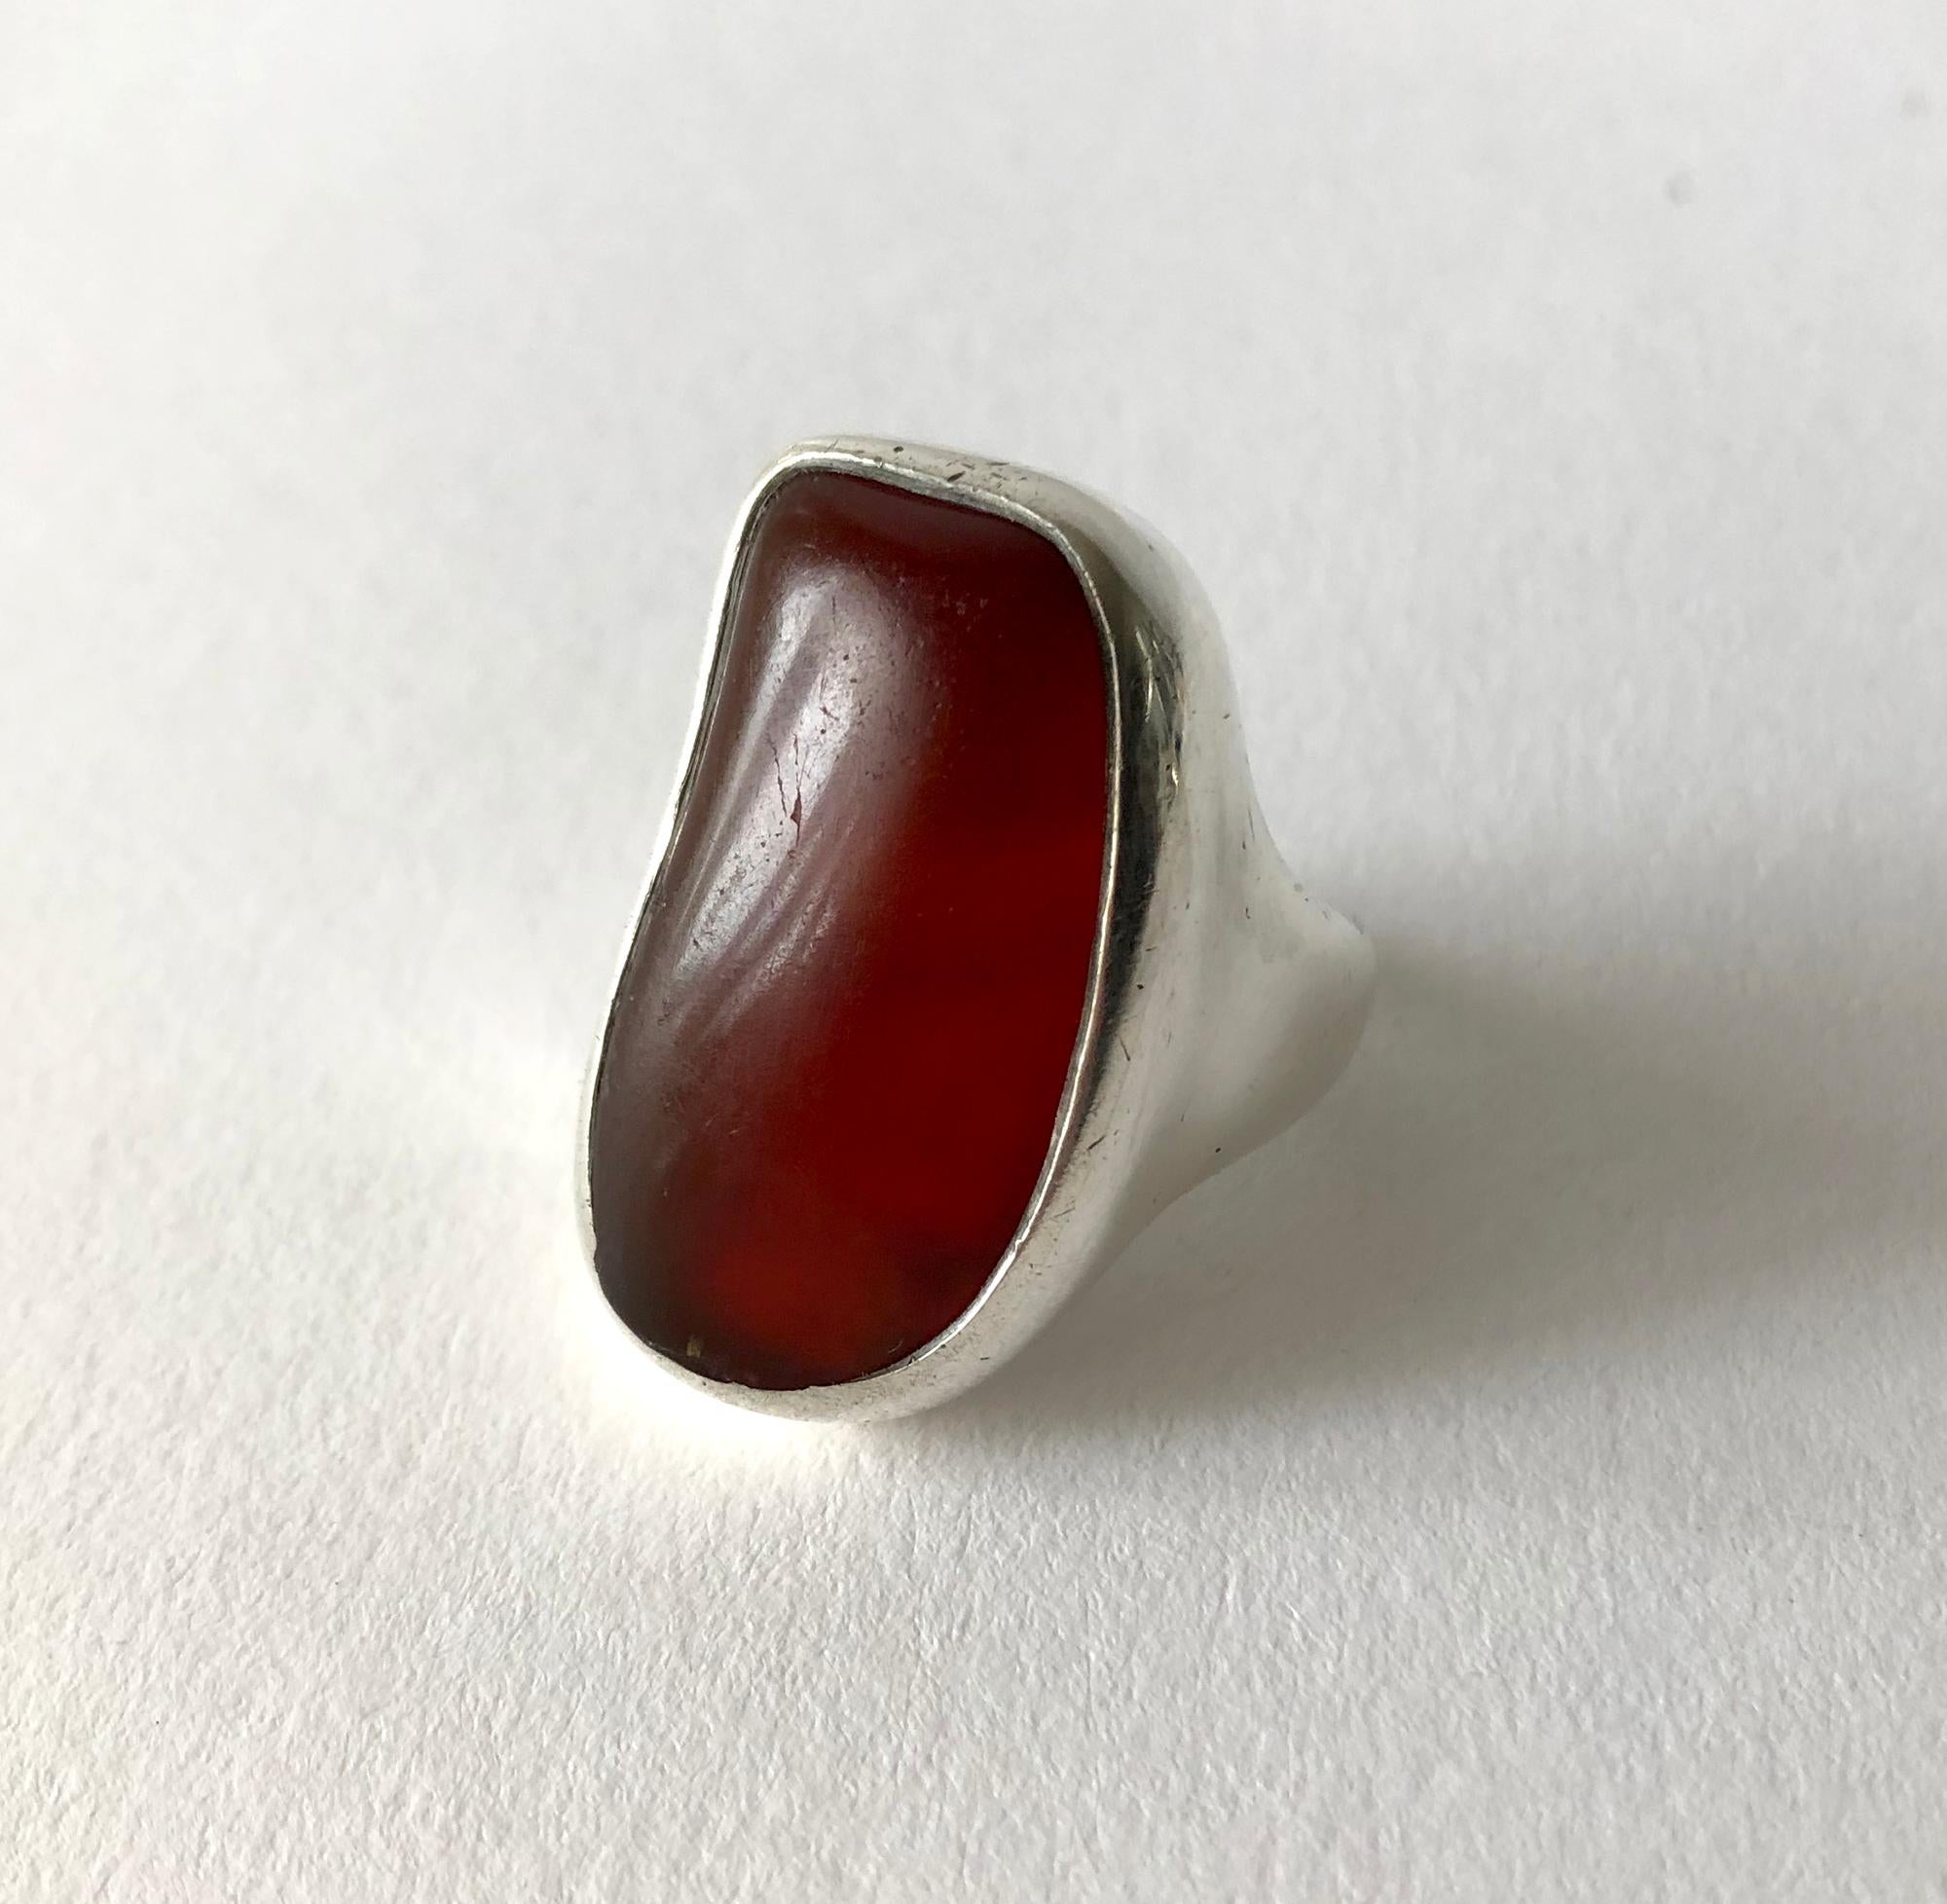 Sterling silver and amber gentlemens ring created by H. Fred Skaggs of Scottsdale, Arizona. Large amber stone and setting are amorphic in shape and completely hand made. Stone and silver do have wear. Stone has a divot and scratches which are